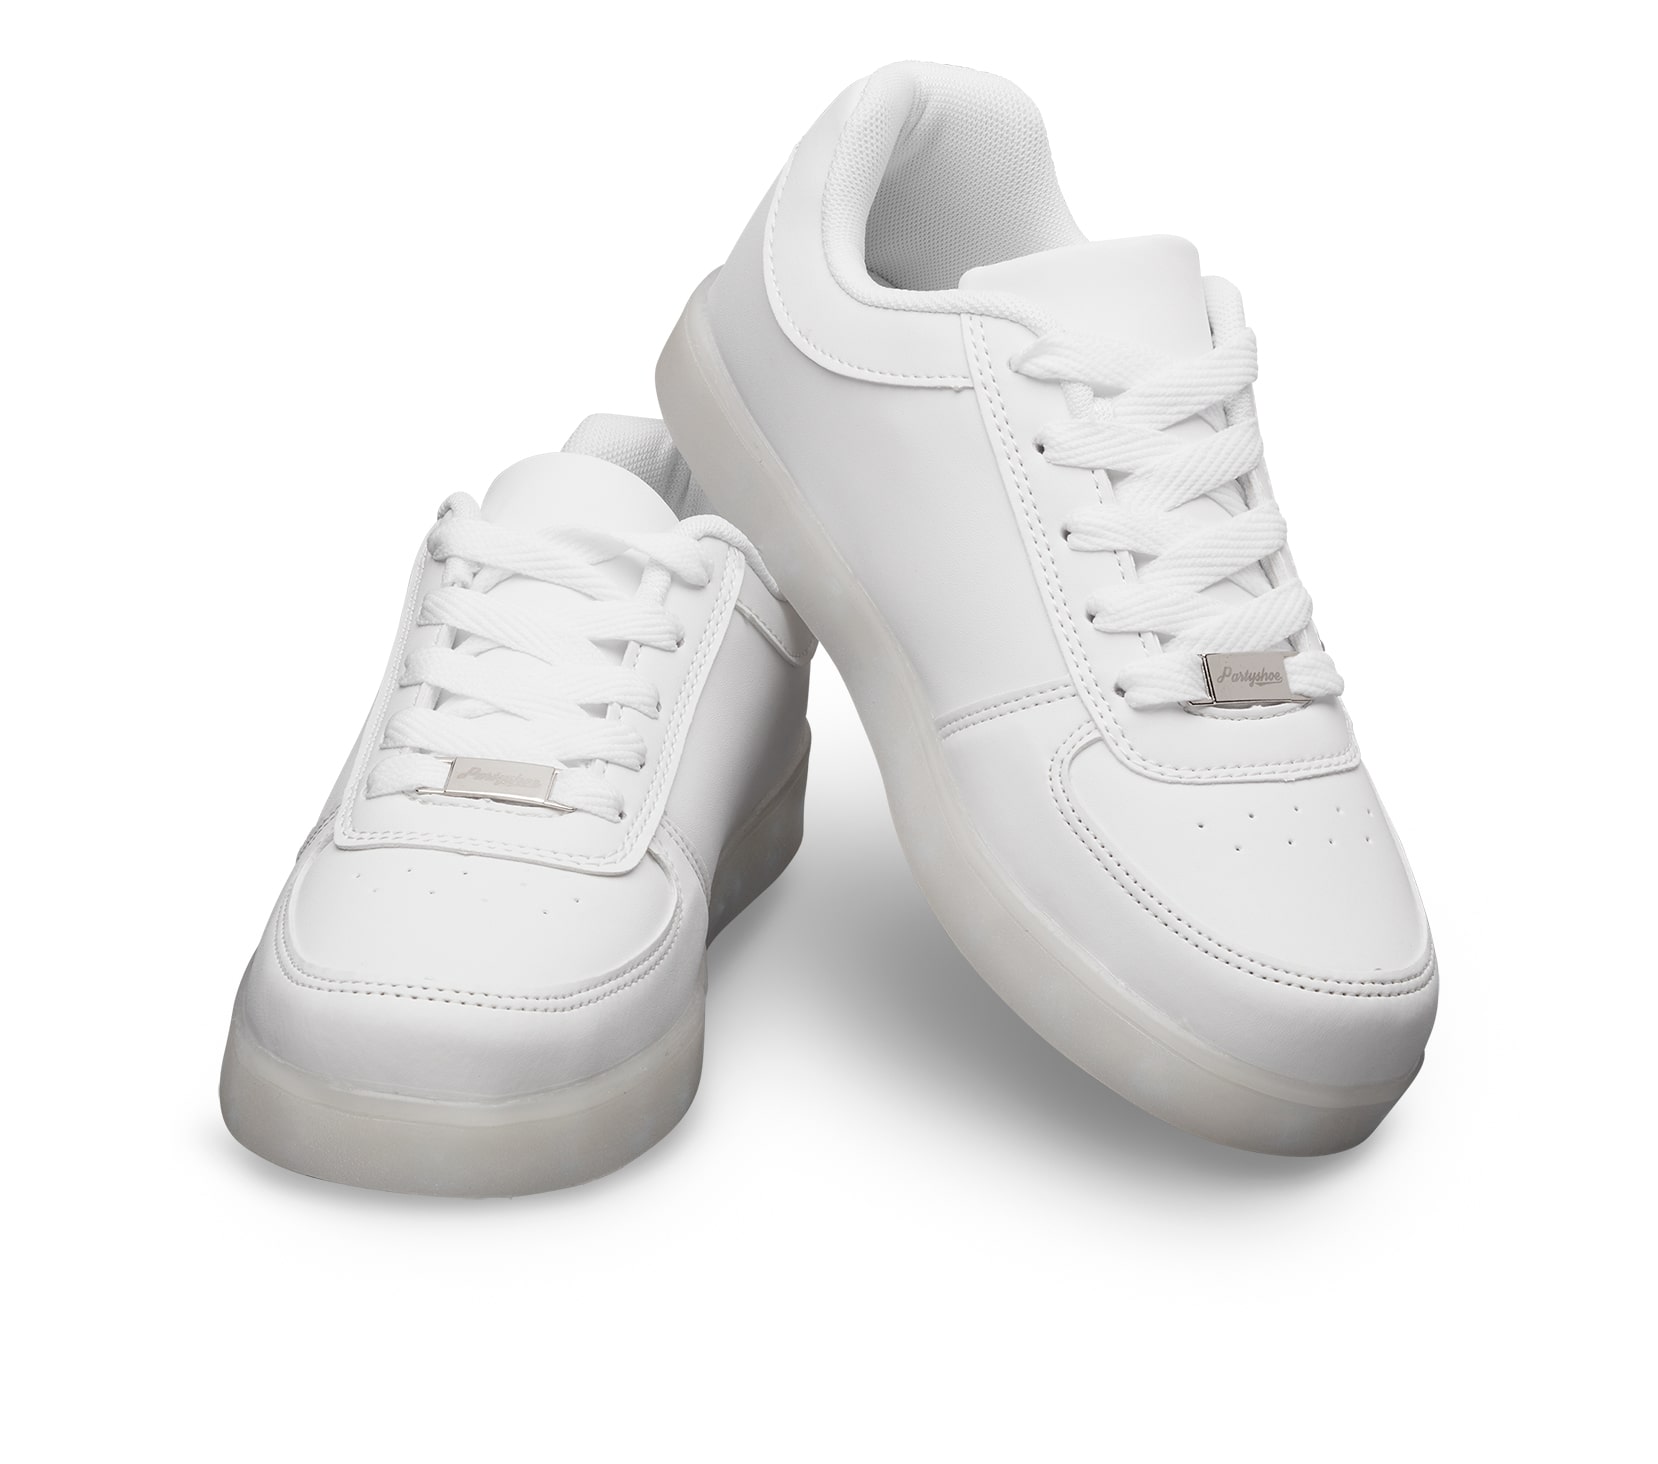 Light Up Shoes White